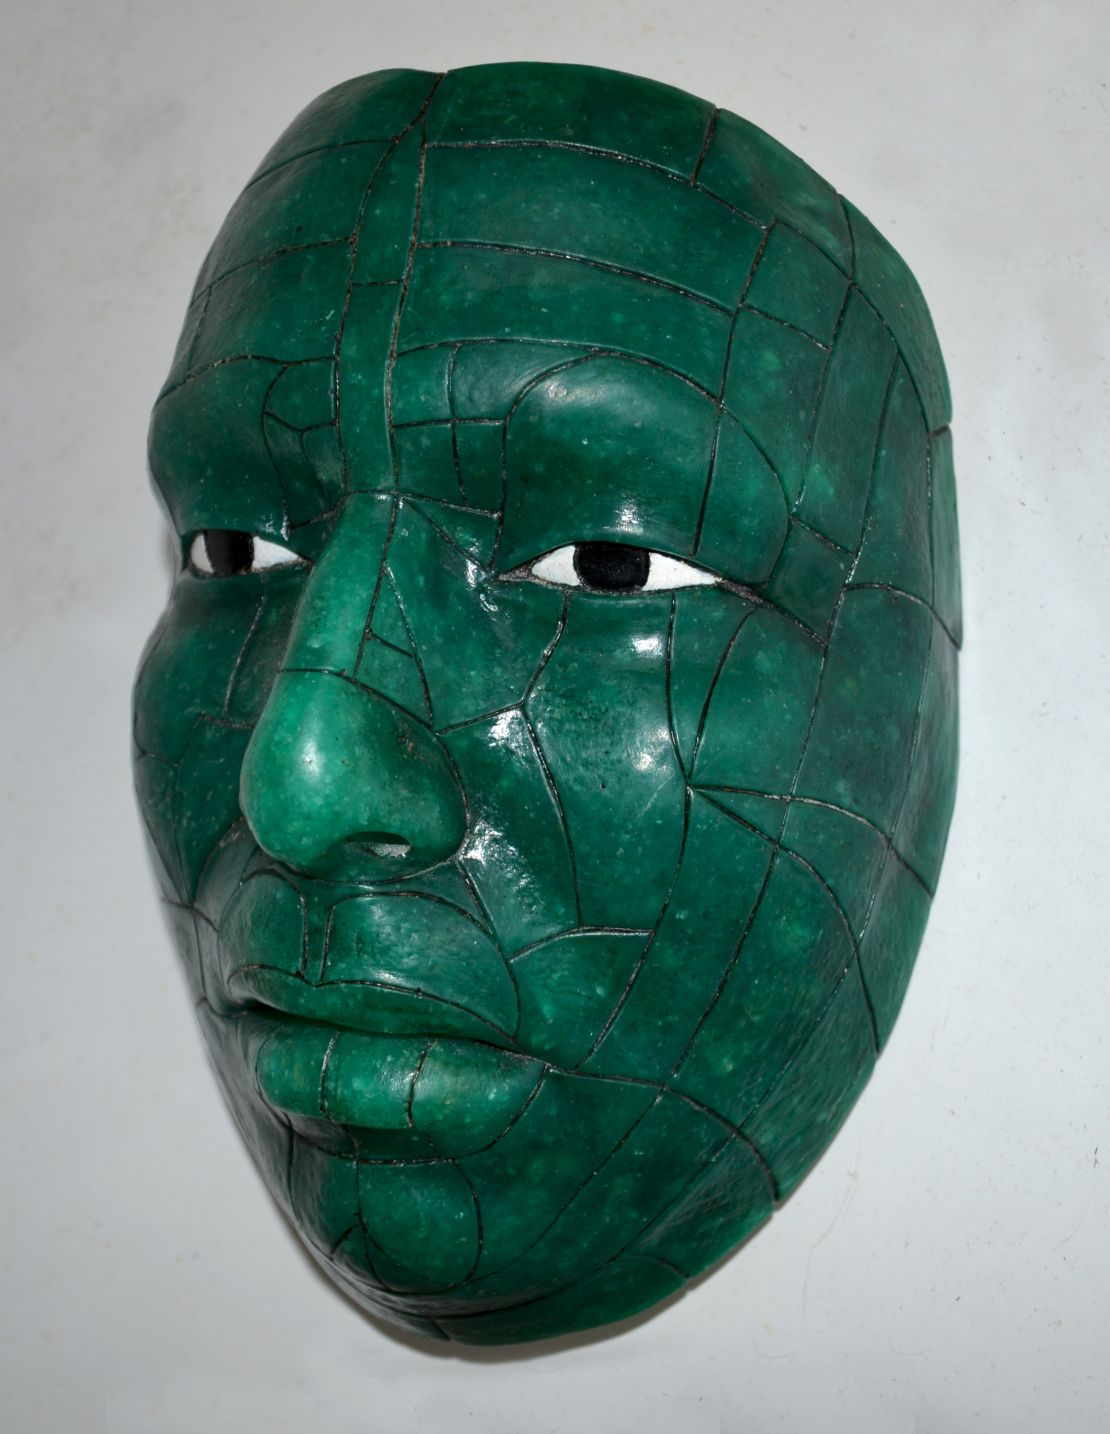 Artist Nick Reynolds said that when he cast him, Amador's body was "still warm" and "the skin came out in goose bumps" as the mould was applied. 